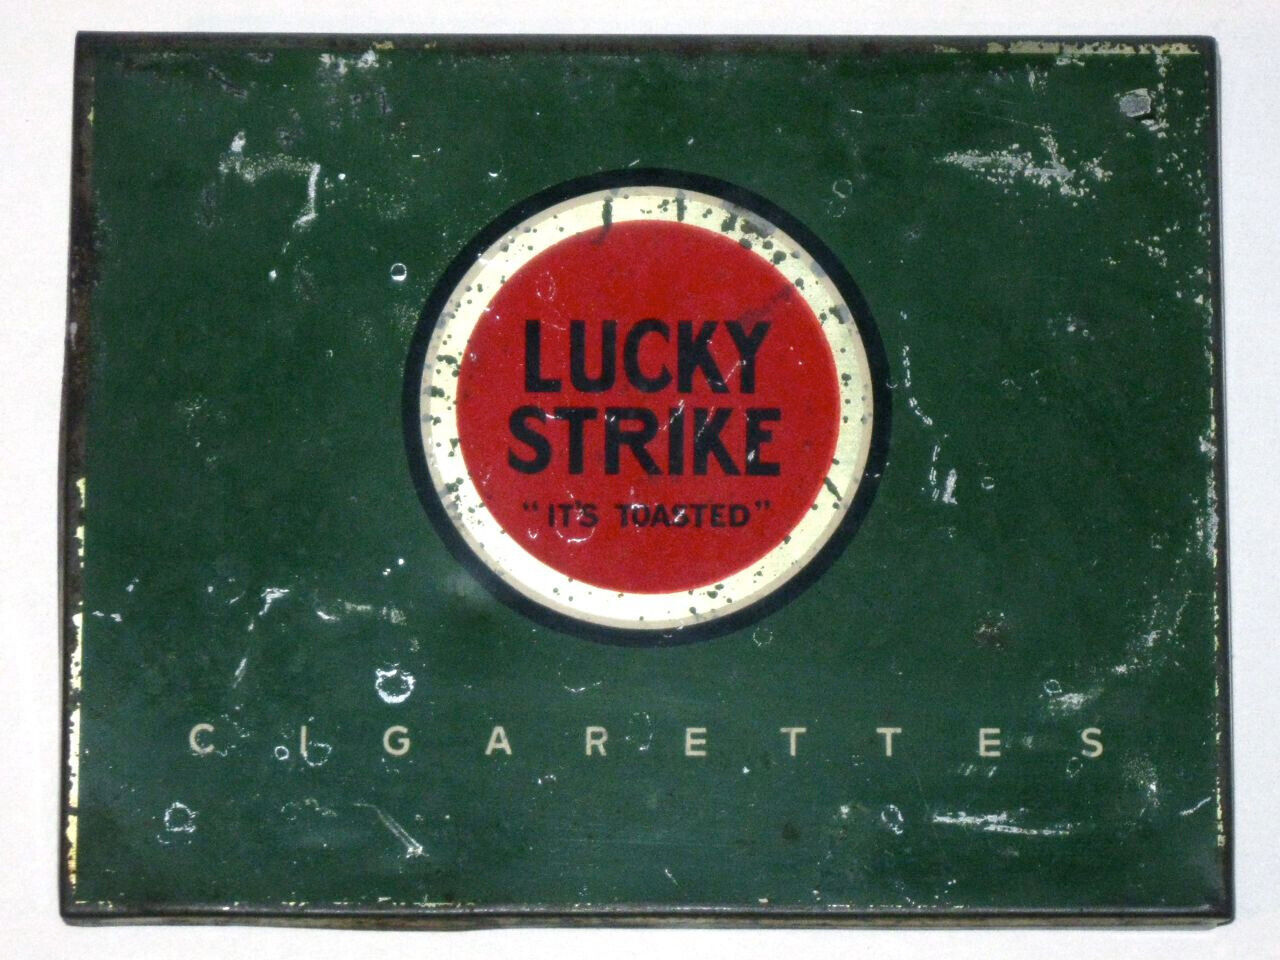 Vintage 1920s-1930s LUCKY STRIKE Cigarettes Hinged IT\'S TOASTED Advertising Tin